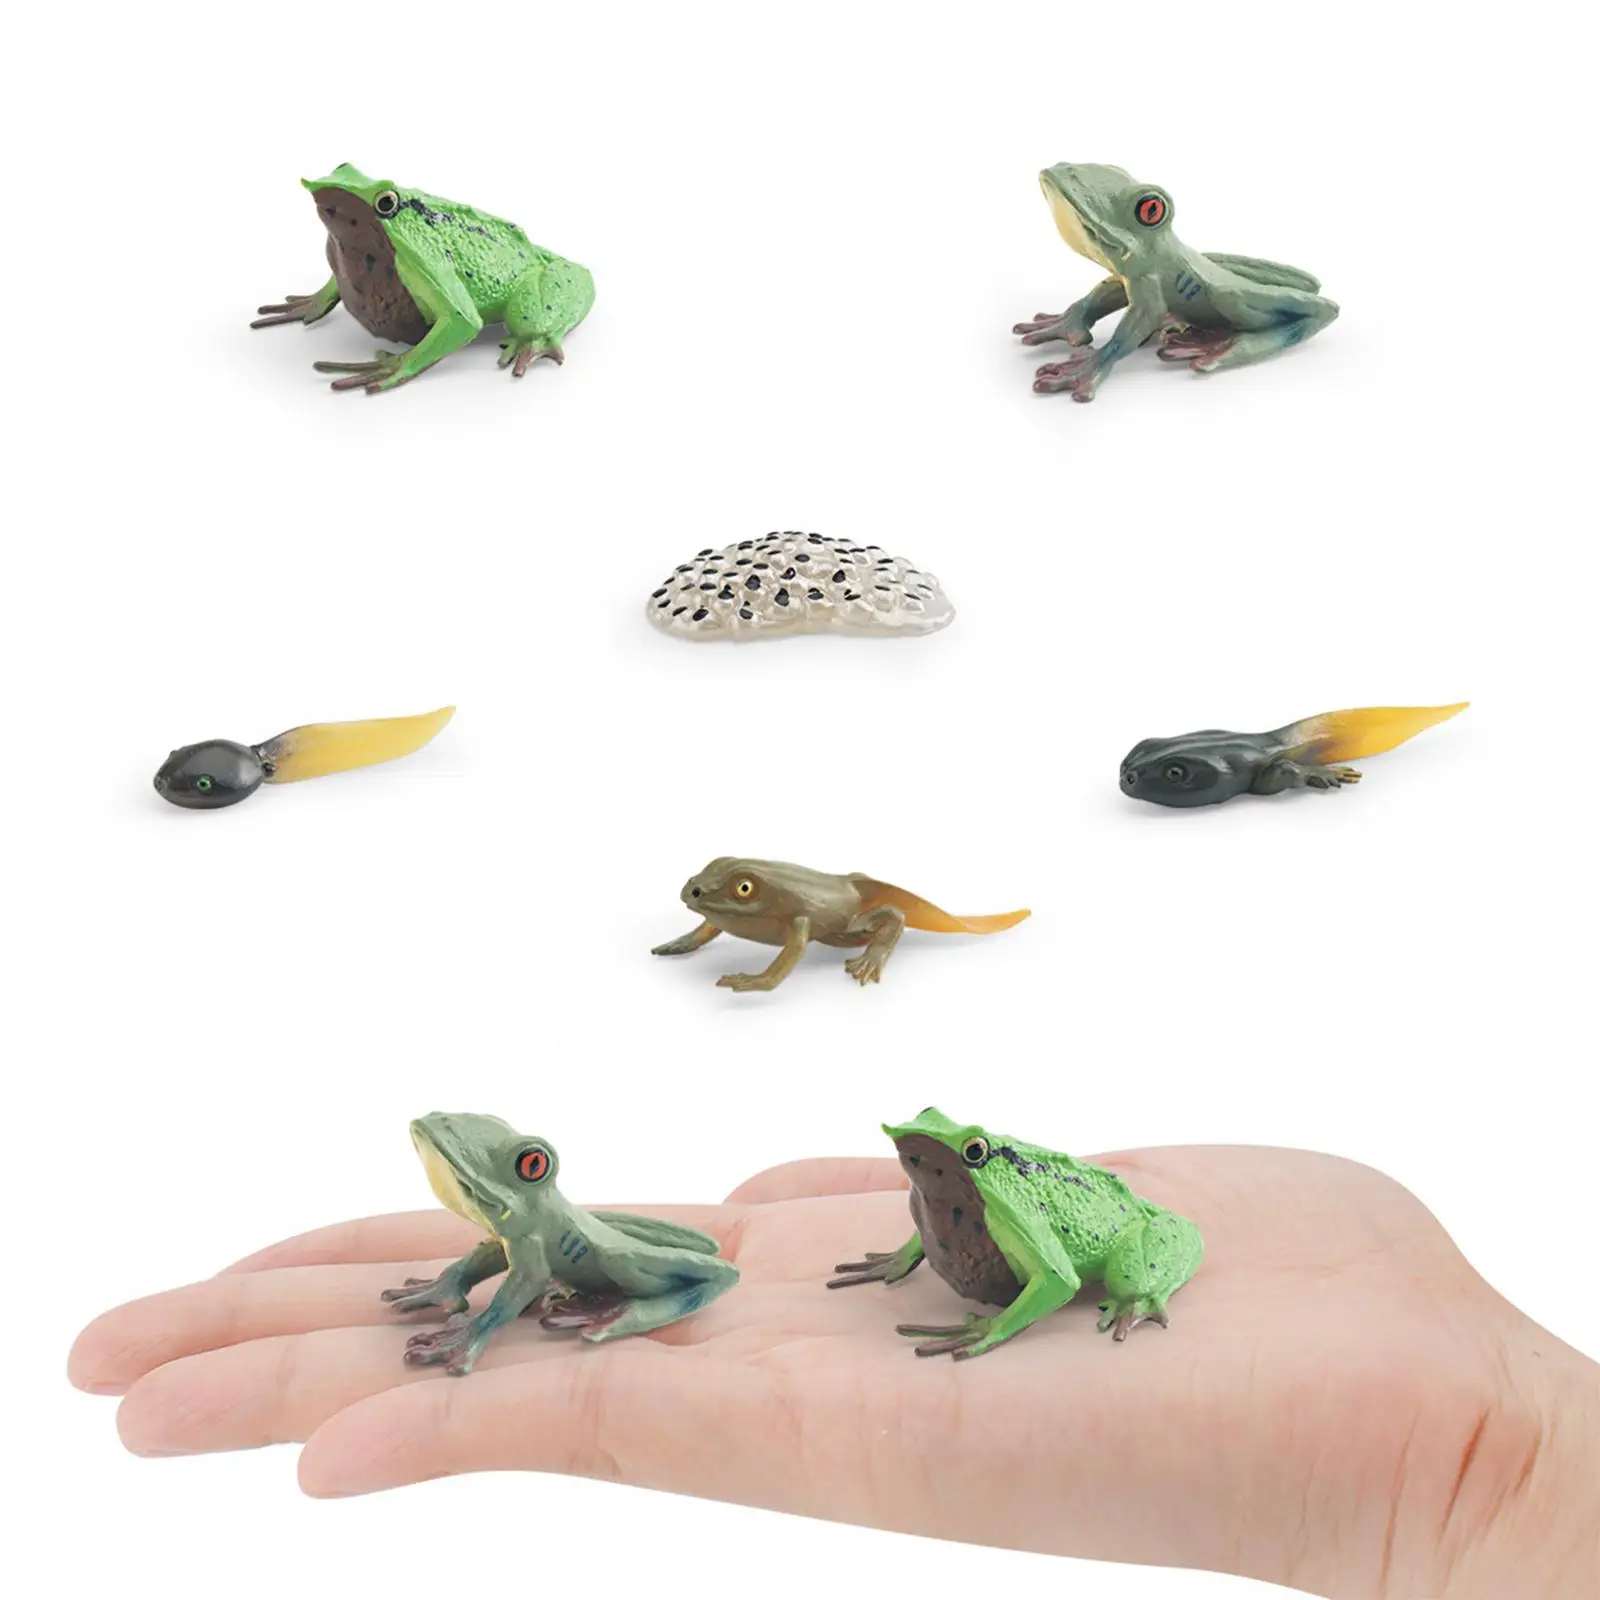 Life Cycle of Frog Toys Cognitive Teaching Materials Realistic for Age 3 to 6 Egg Tadpole to Frog Animal Growth Cycle Set